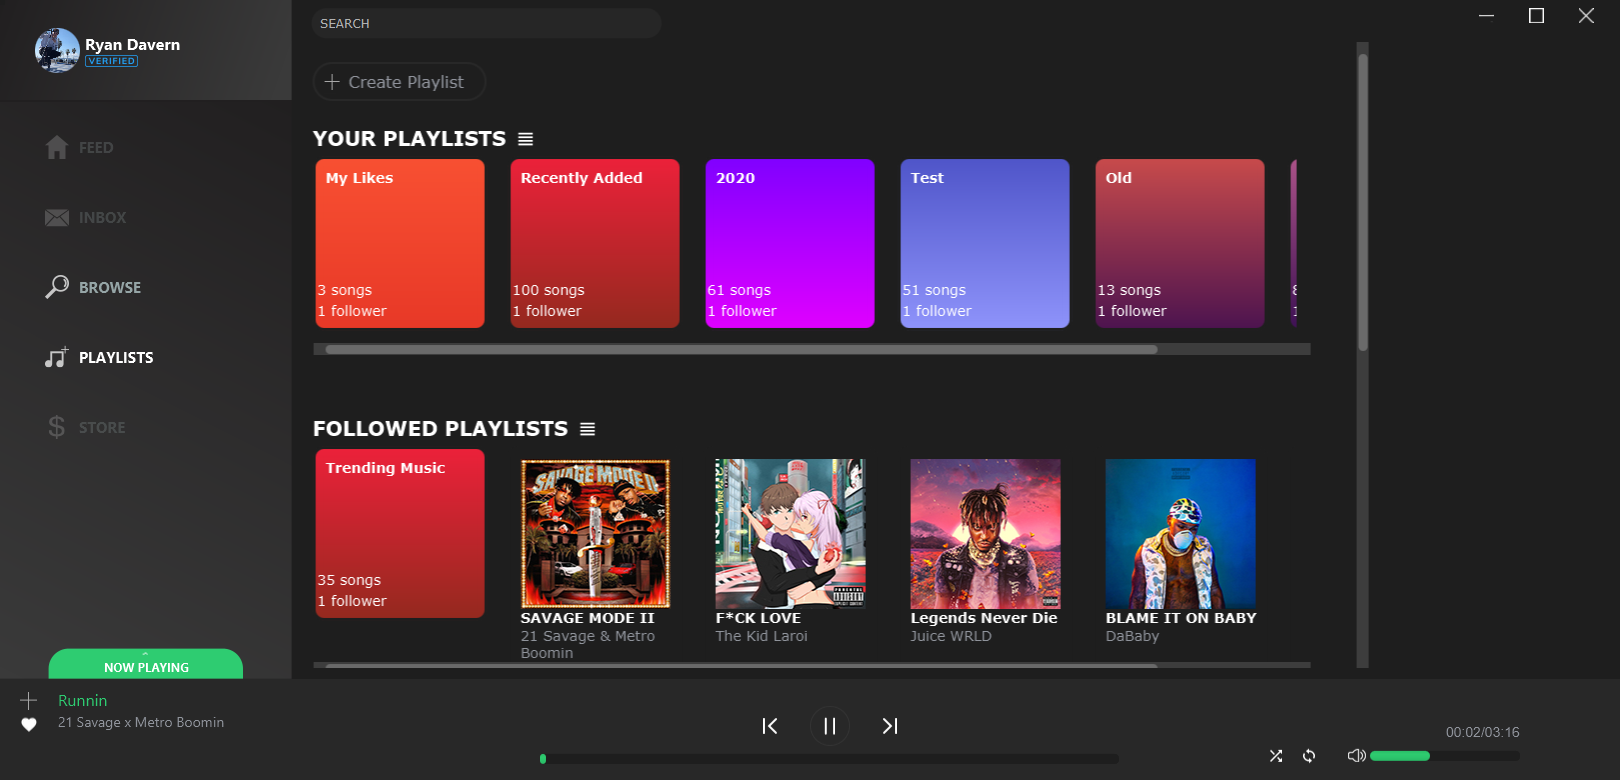 Playlist page displays your created playlists and followed playlists / albums.